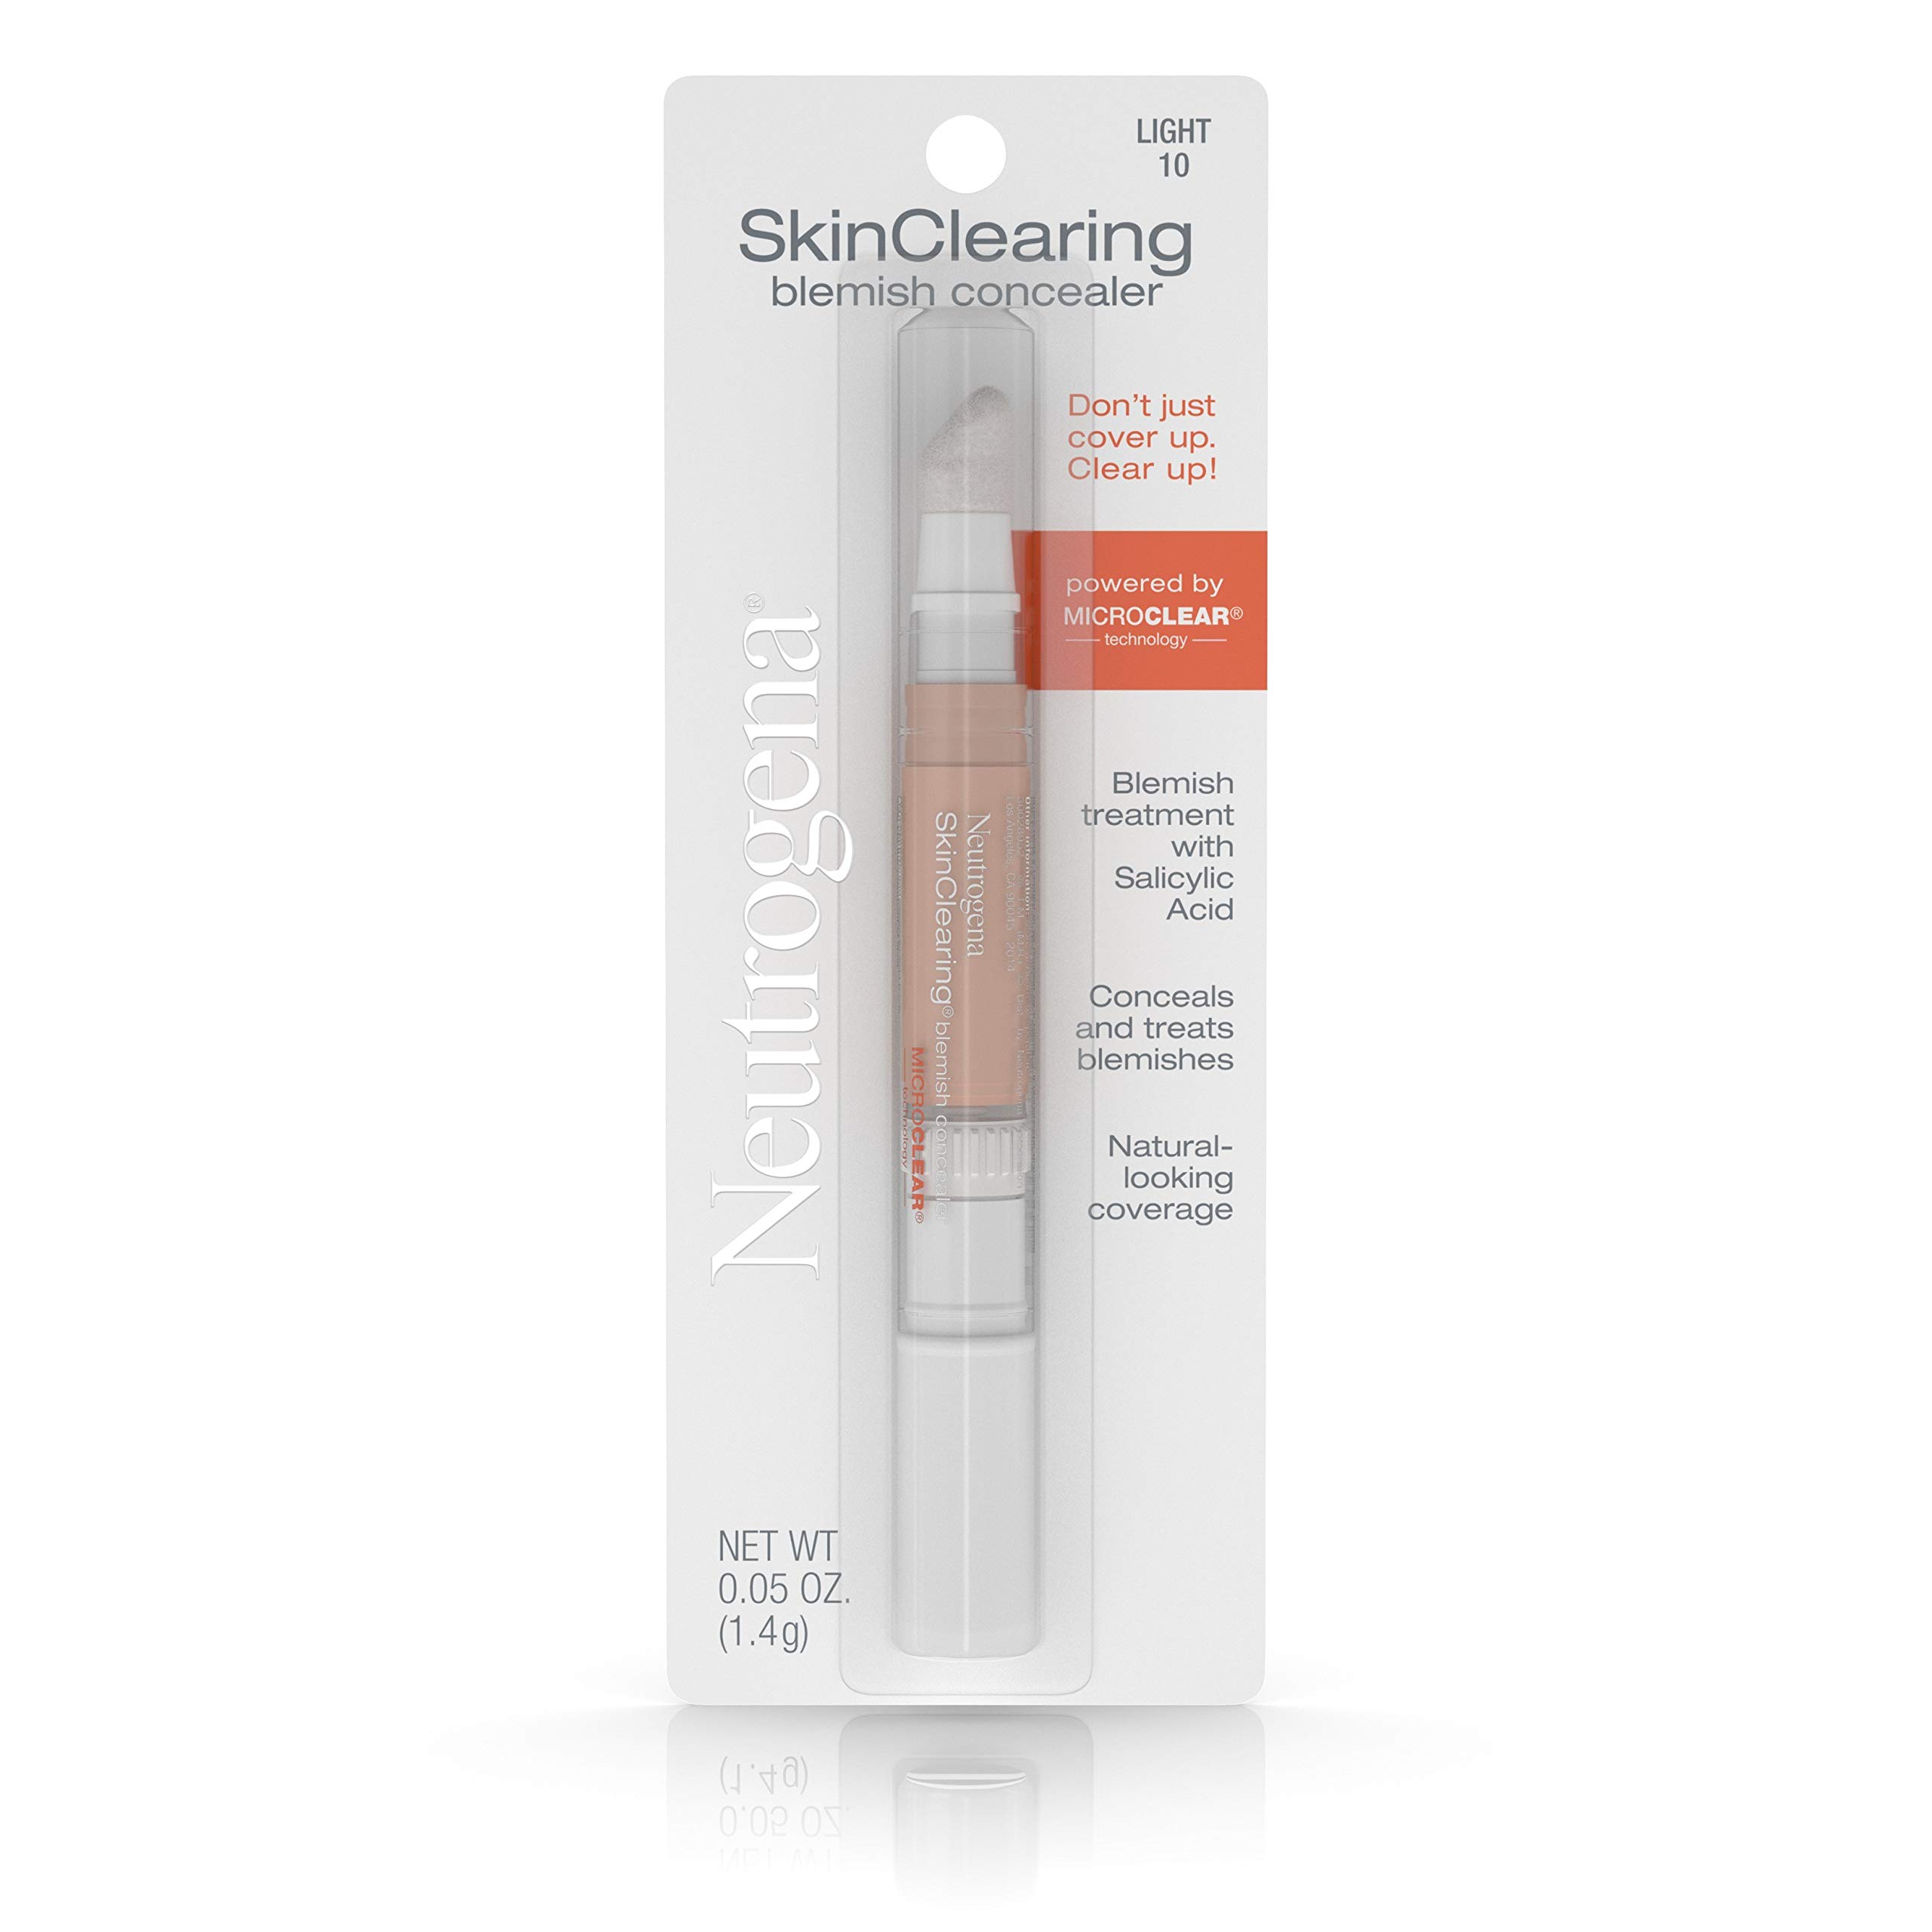 Neutrogena SkinClearing Blemish Concealer Face Makeup with Salicylic Acid Acne Medicine, Non-Comedogenic and Oil-Free Concealer Helps Cover, Treat & Prevent Breakouts, Light 10,.05 oz